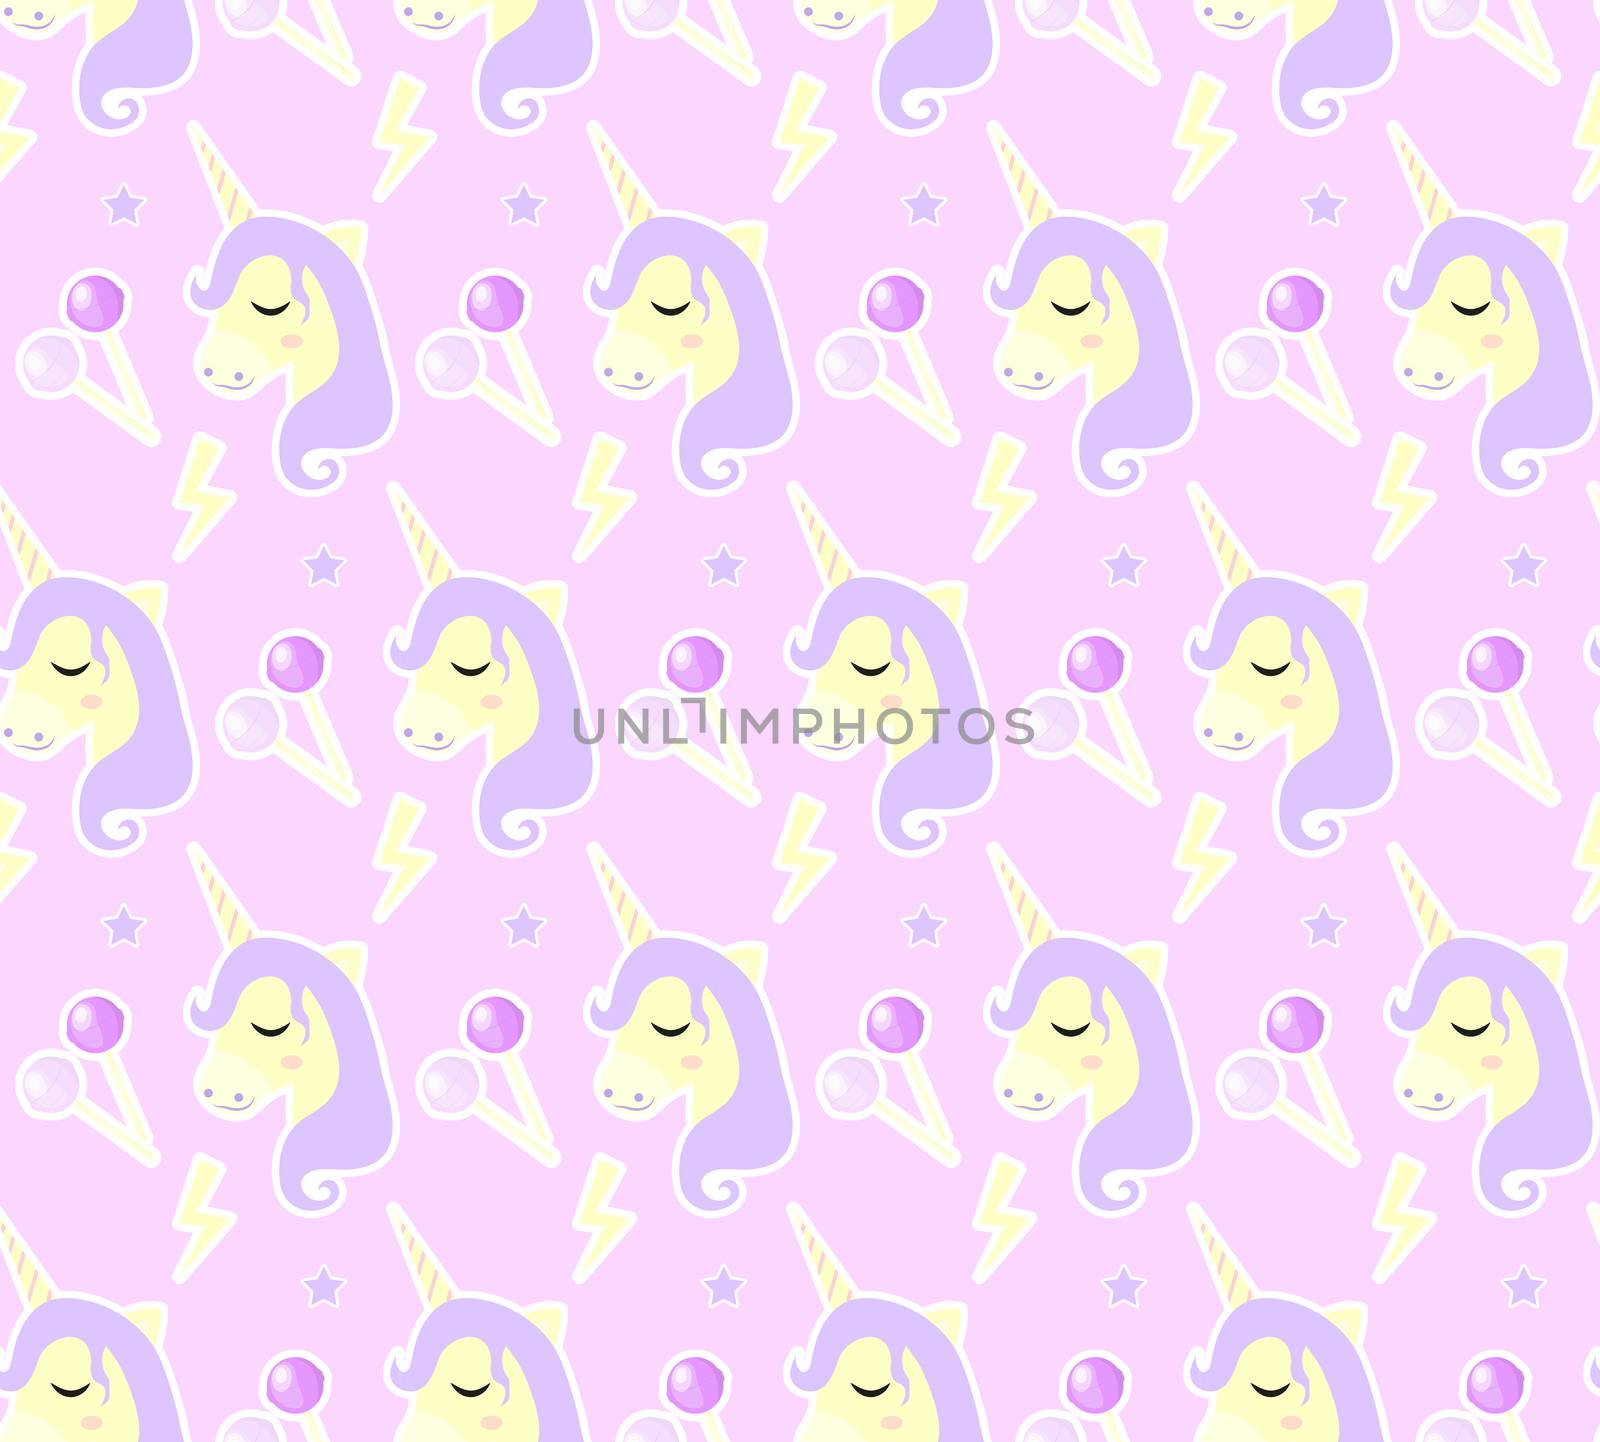 Magic Unicorn seamless pattern. Modern fairytale endless textures, magical repeating backgrounds. Cute baby backdrops. illustration